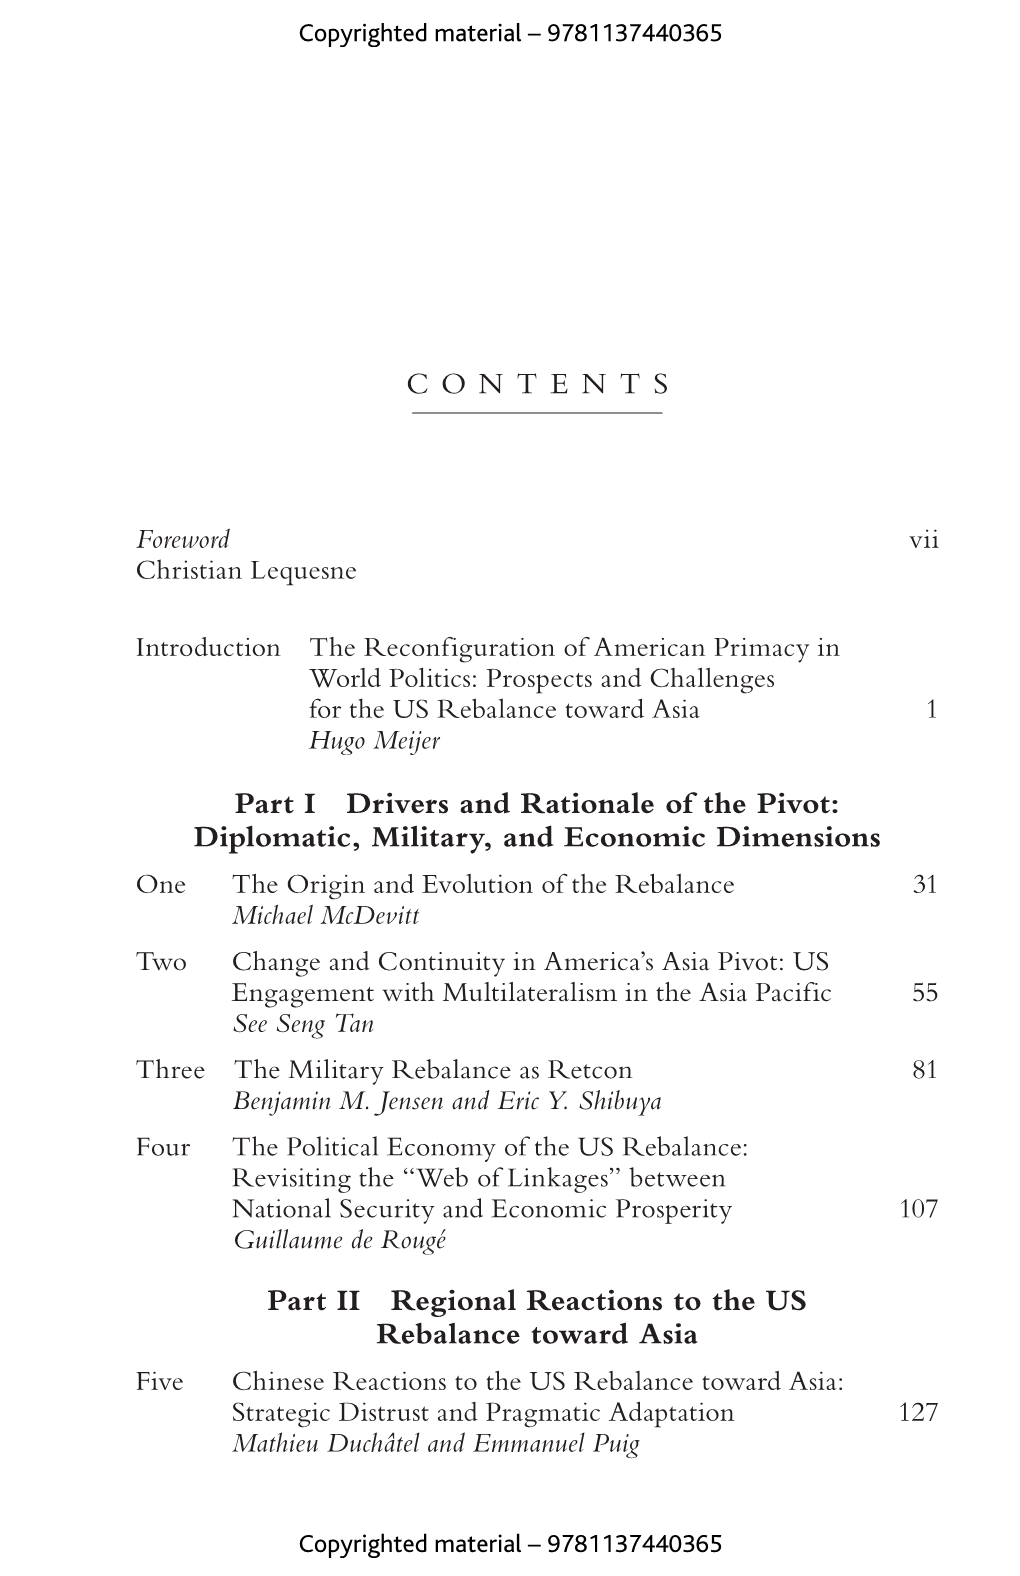 CONTENTS Part I Drivers and Rationale of the Pivot: Diplomatic